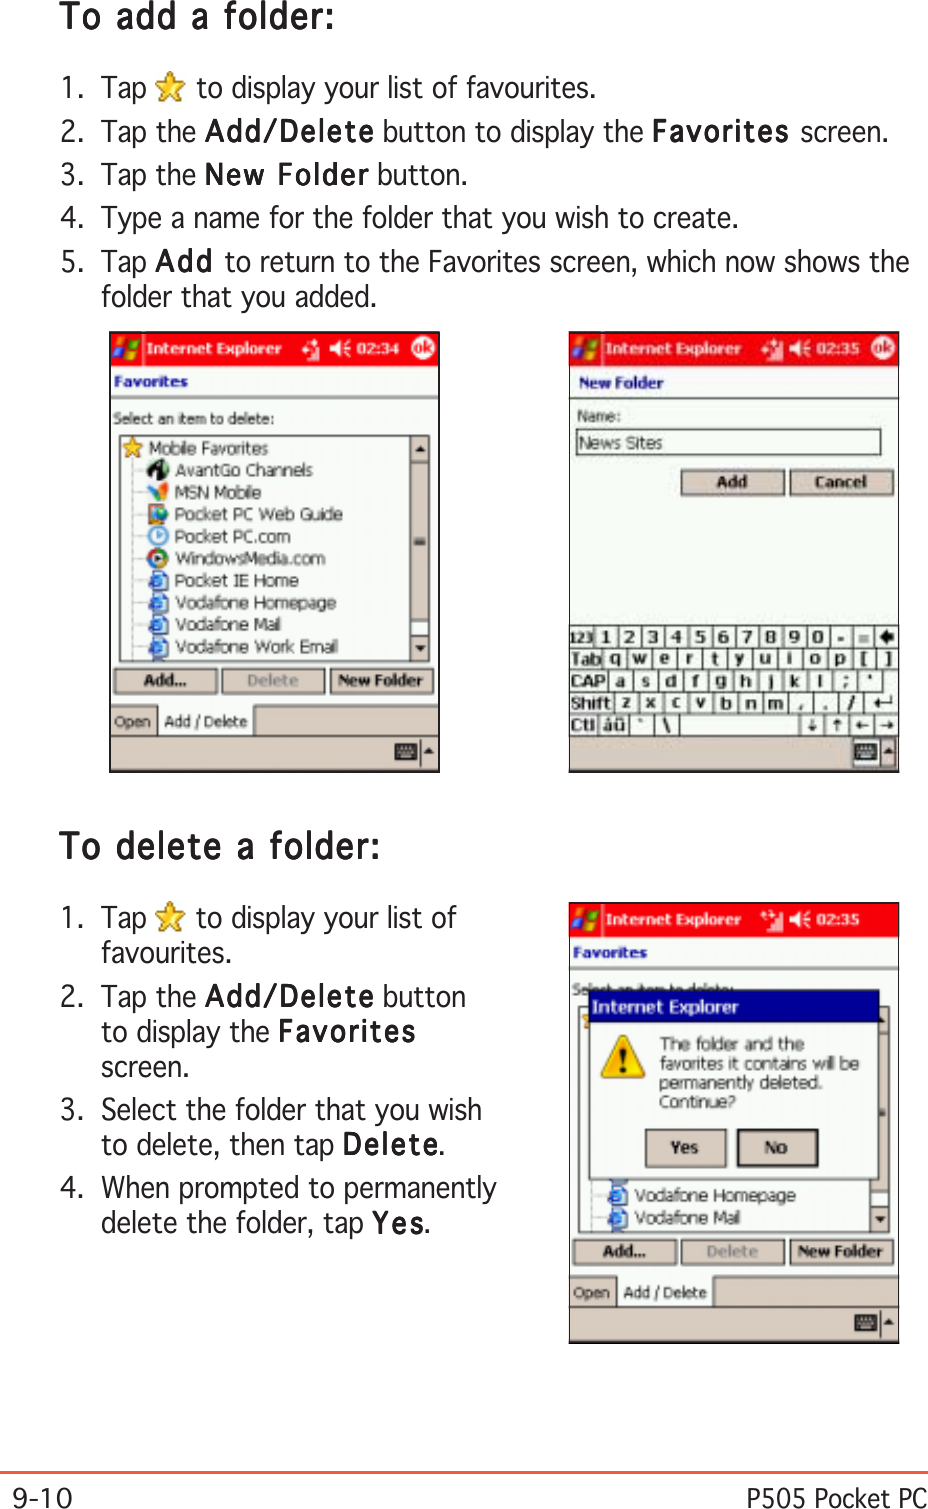 9-10P505 Pocket PCTo add a folder:To add a folder:To add a folder:To add a folder:To add a folder:1. Tap   to display your list of favourites.2. Tap the Add/DeleteAdd/DeleteAdd/DeleteAdd/DeleteAdd/Delete button to display the FavoritesFavoritesFavoritesFavoritesFavorites screen.3. Tap the New FolderNew FolderNew FolderNew FolderNew Folder button.4. Type a name for the folder that you wish to create.5. Tap AddAddAddAddAdd to return to the Favorites screen, which now shows thefolder that you added.To delete a folder:To delete a folder:To delete a folder:To delete a folder:To delete a folder:1. Tap   to display your list offavourites.2. Tap the Add/DeleteAdd/DeleteAdd/DeleteAdd/DeleteAdd/Delete buttonto display the FavoritesFavoritesFavoritesFavoritesFavoritesscreen.3. Select the folder that you wishto delete, then tap DeleteDeleteDeleteDeleteDelete.4. When prompted to permanentlydelete the folder, tap YesYesYesYesYes.